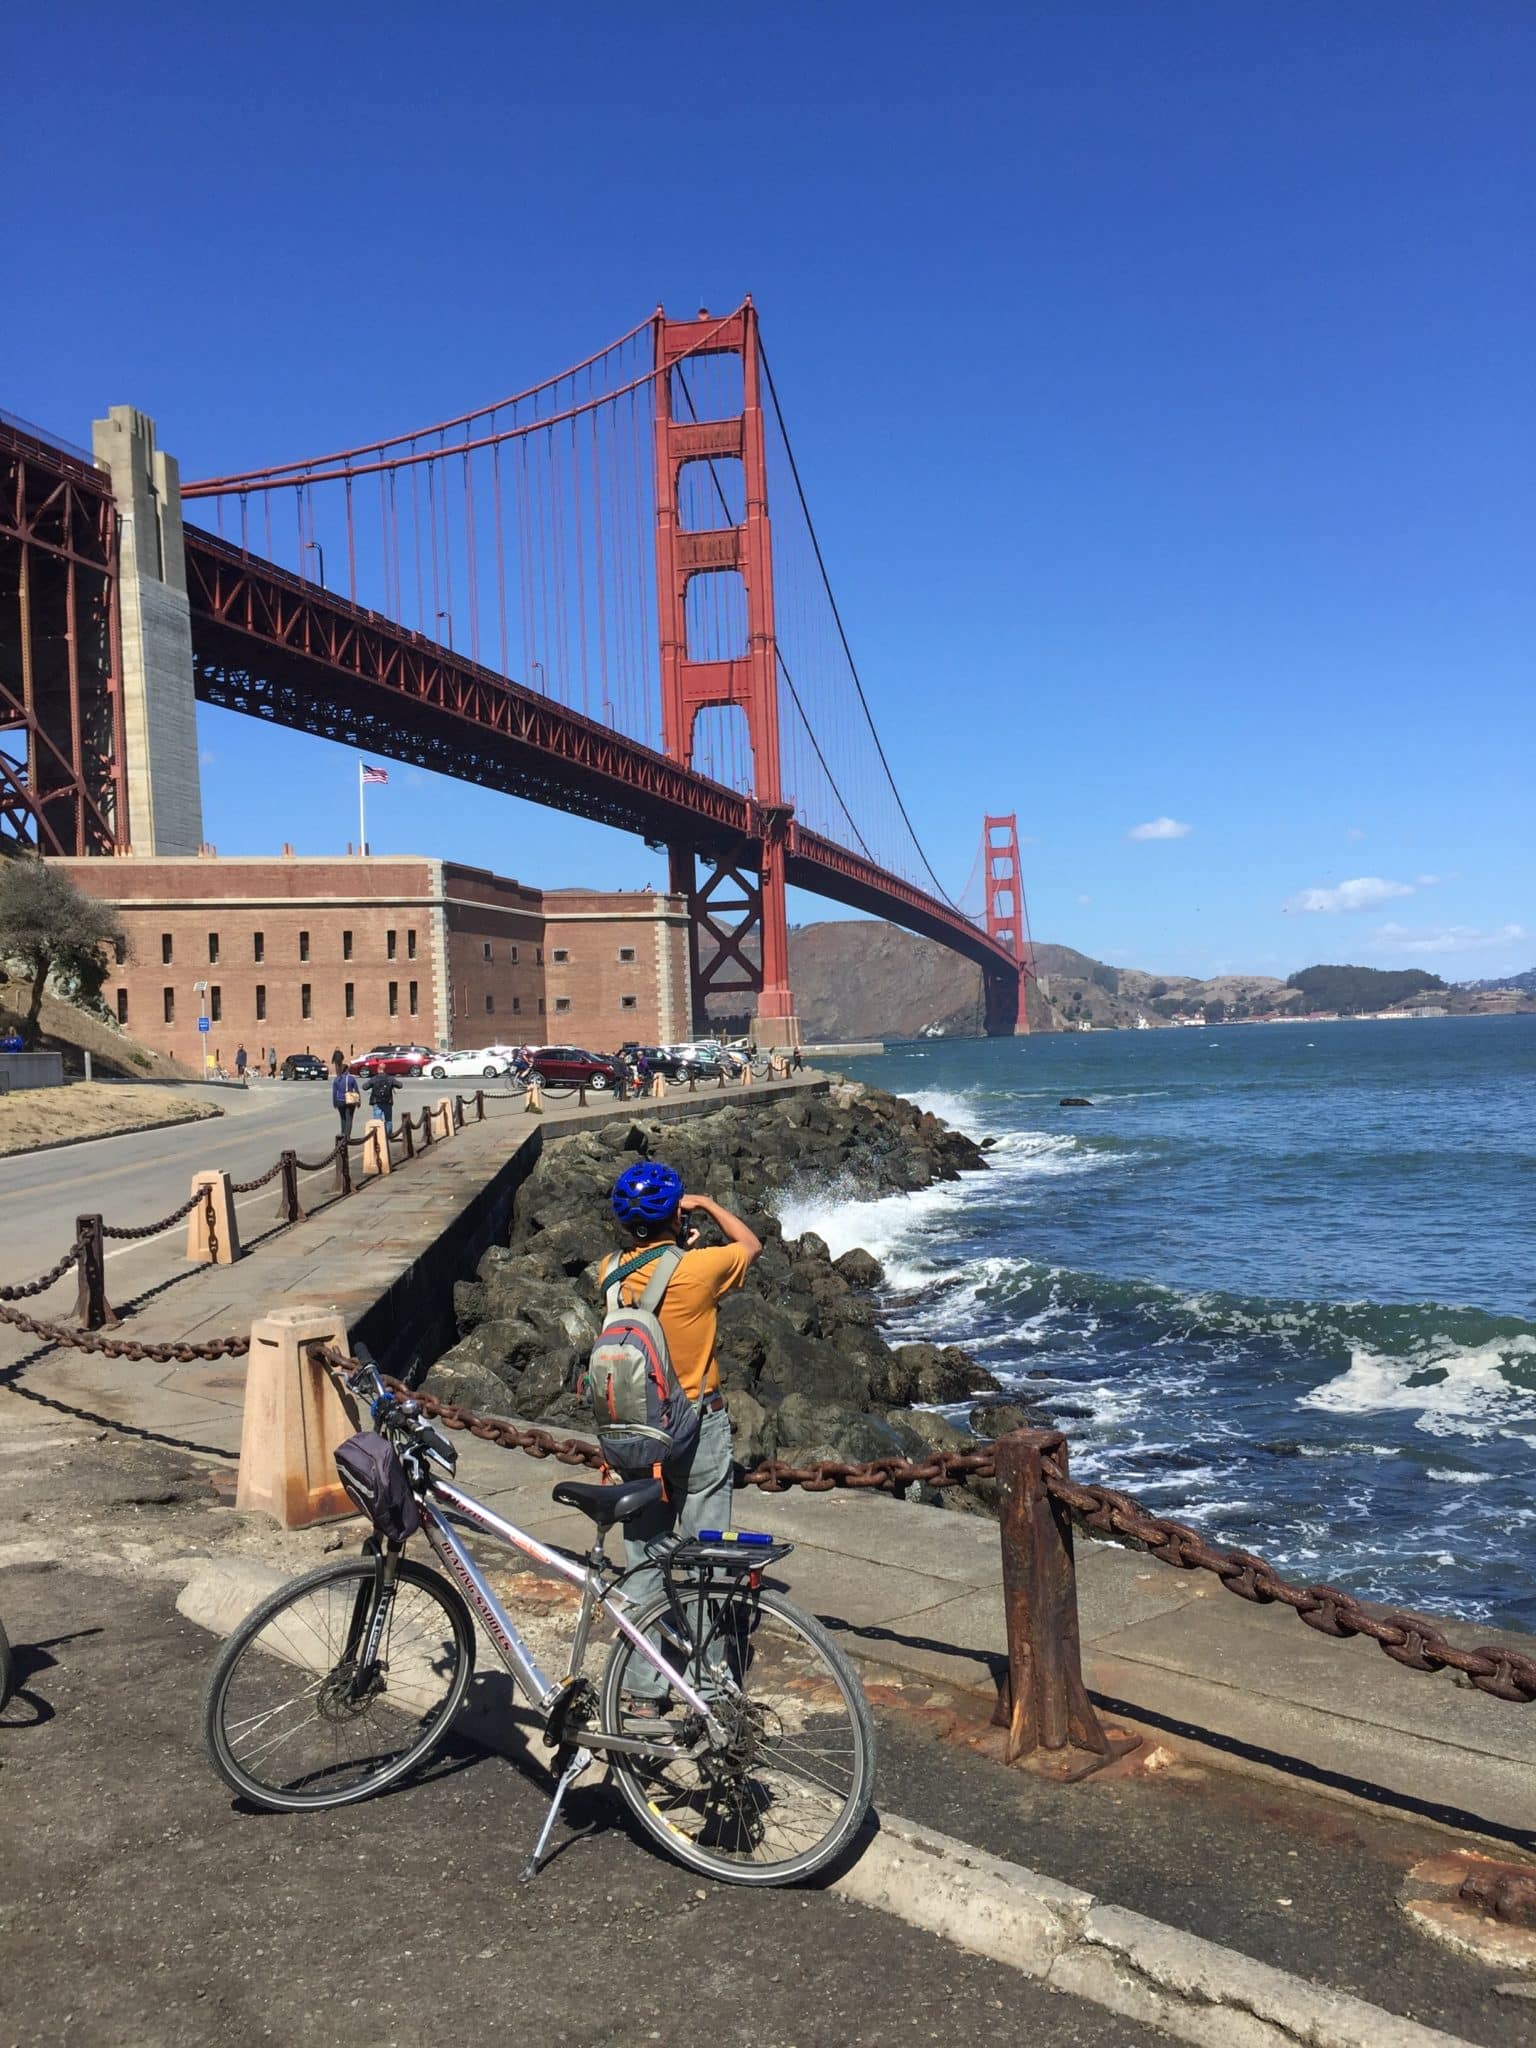 A man with a bike takes a photo of the Golden Gate Bridge